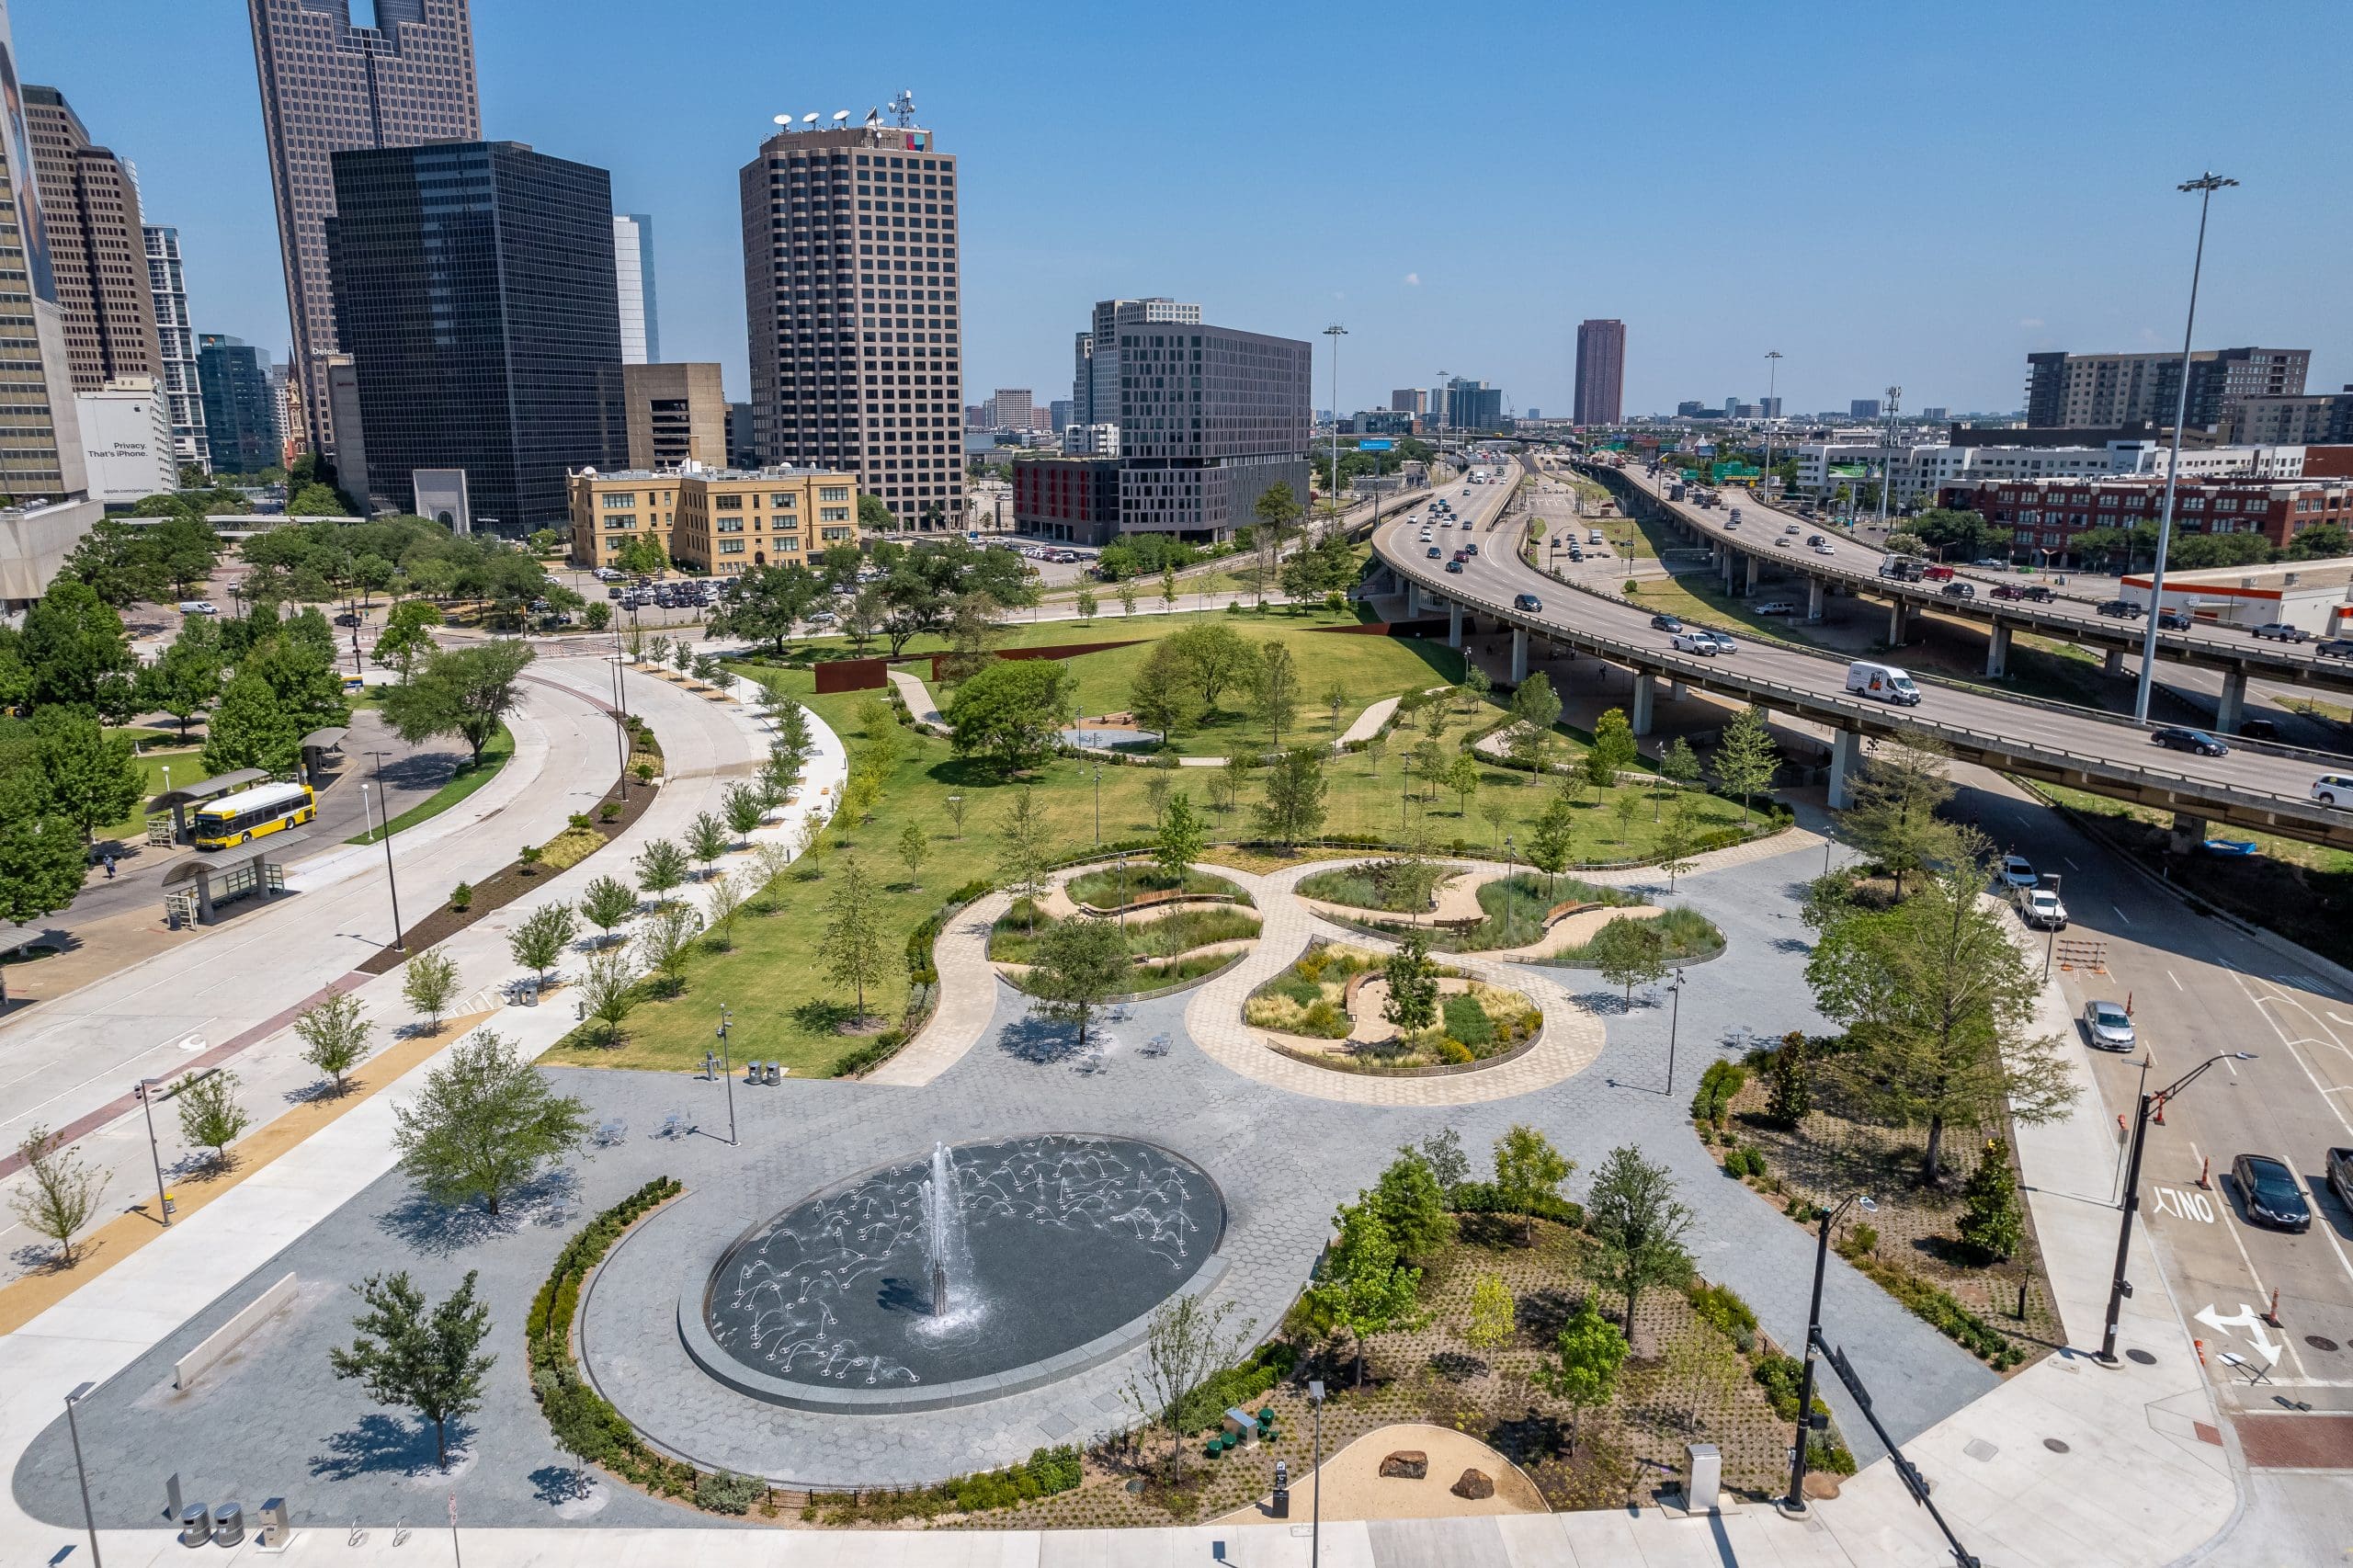 Landscapes of the Month: Revitalizing a Downtown Dallas Park - The Edge from the National Association of Landscape Professionals